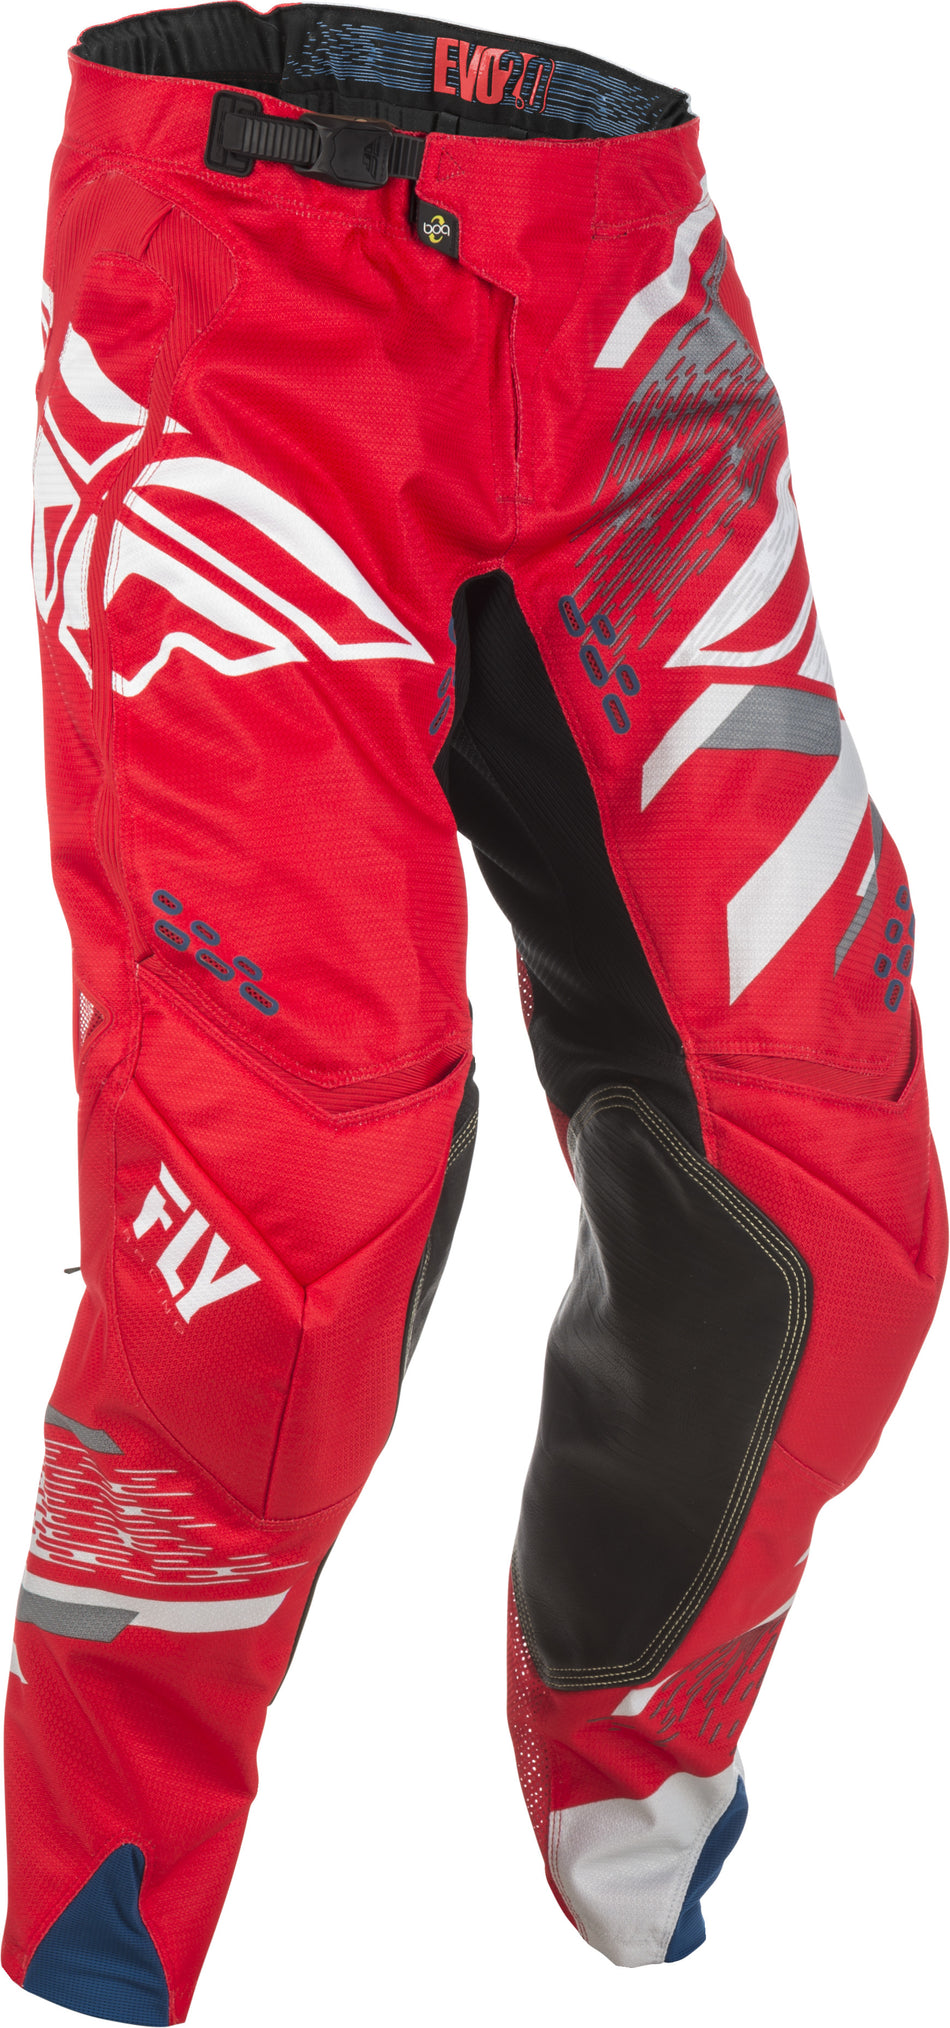 FLY RACING Evolution 2.0 Pants Red/Grey/White Sz 28 371-23228